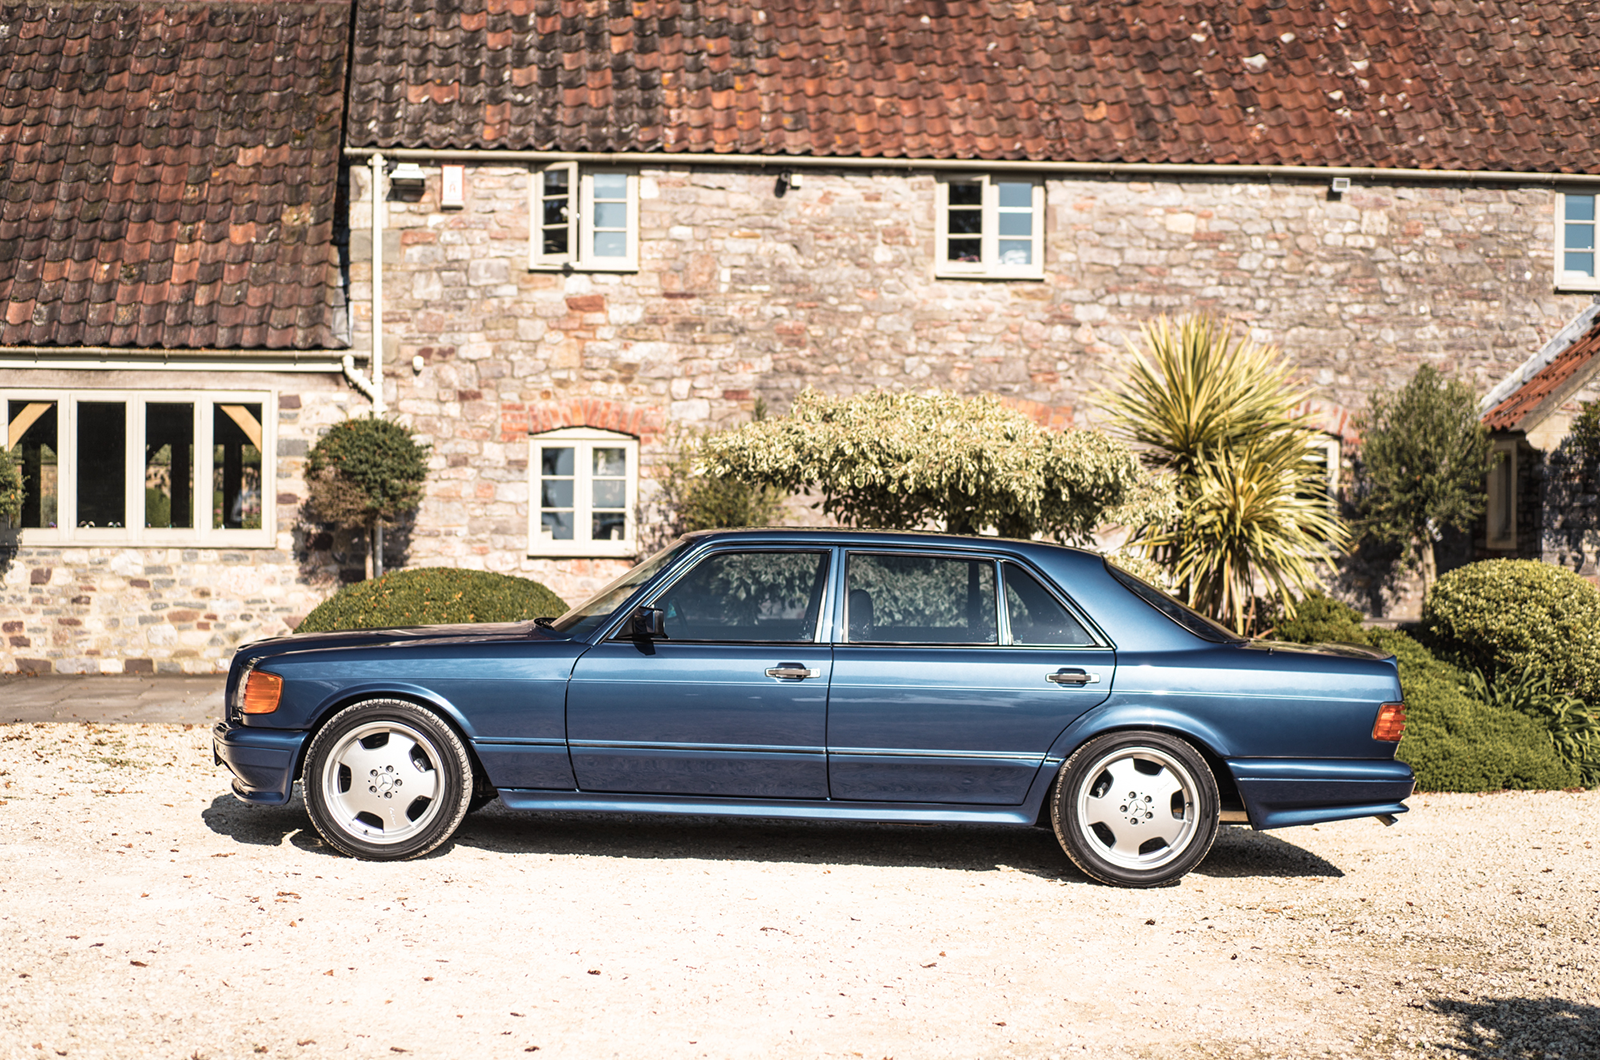 Classic & Sports Car – Want to own Paul McCartney’s Mercedes?